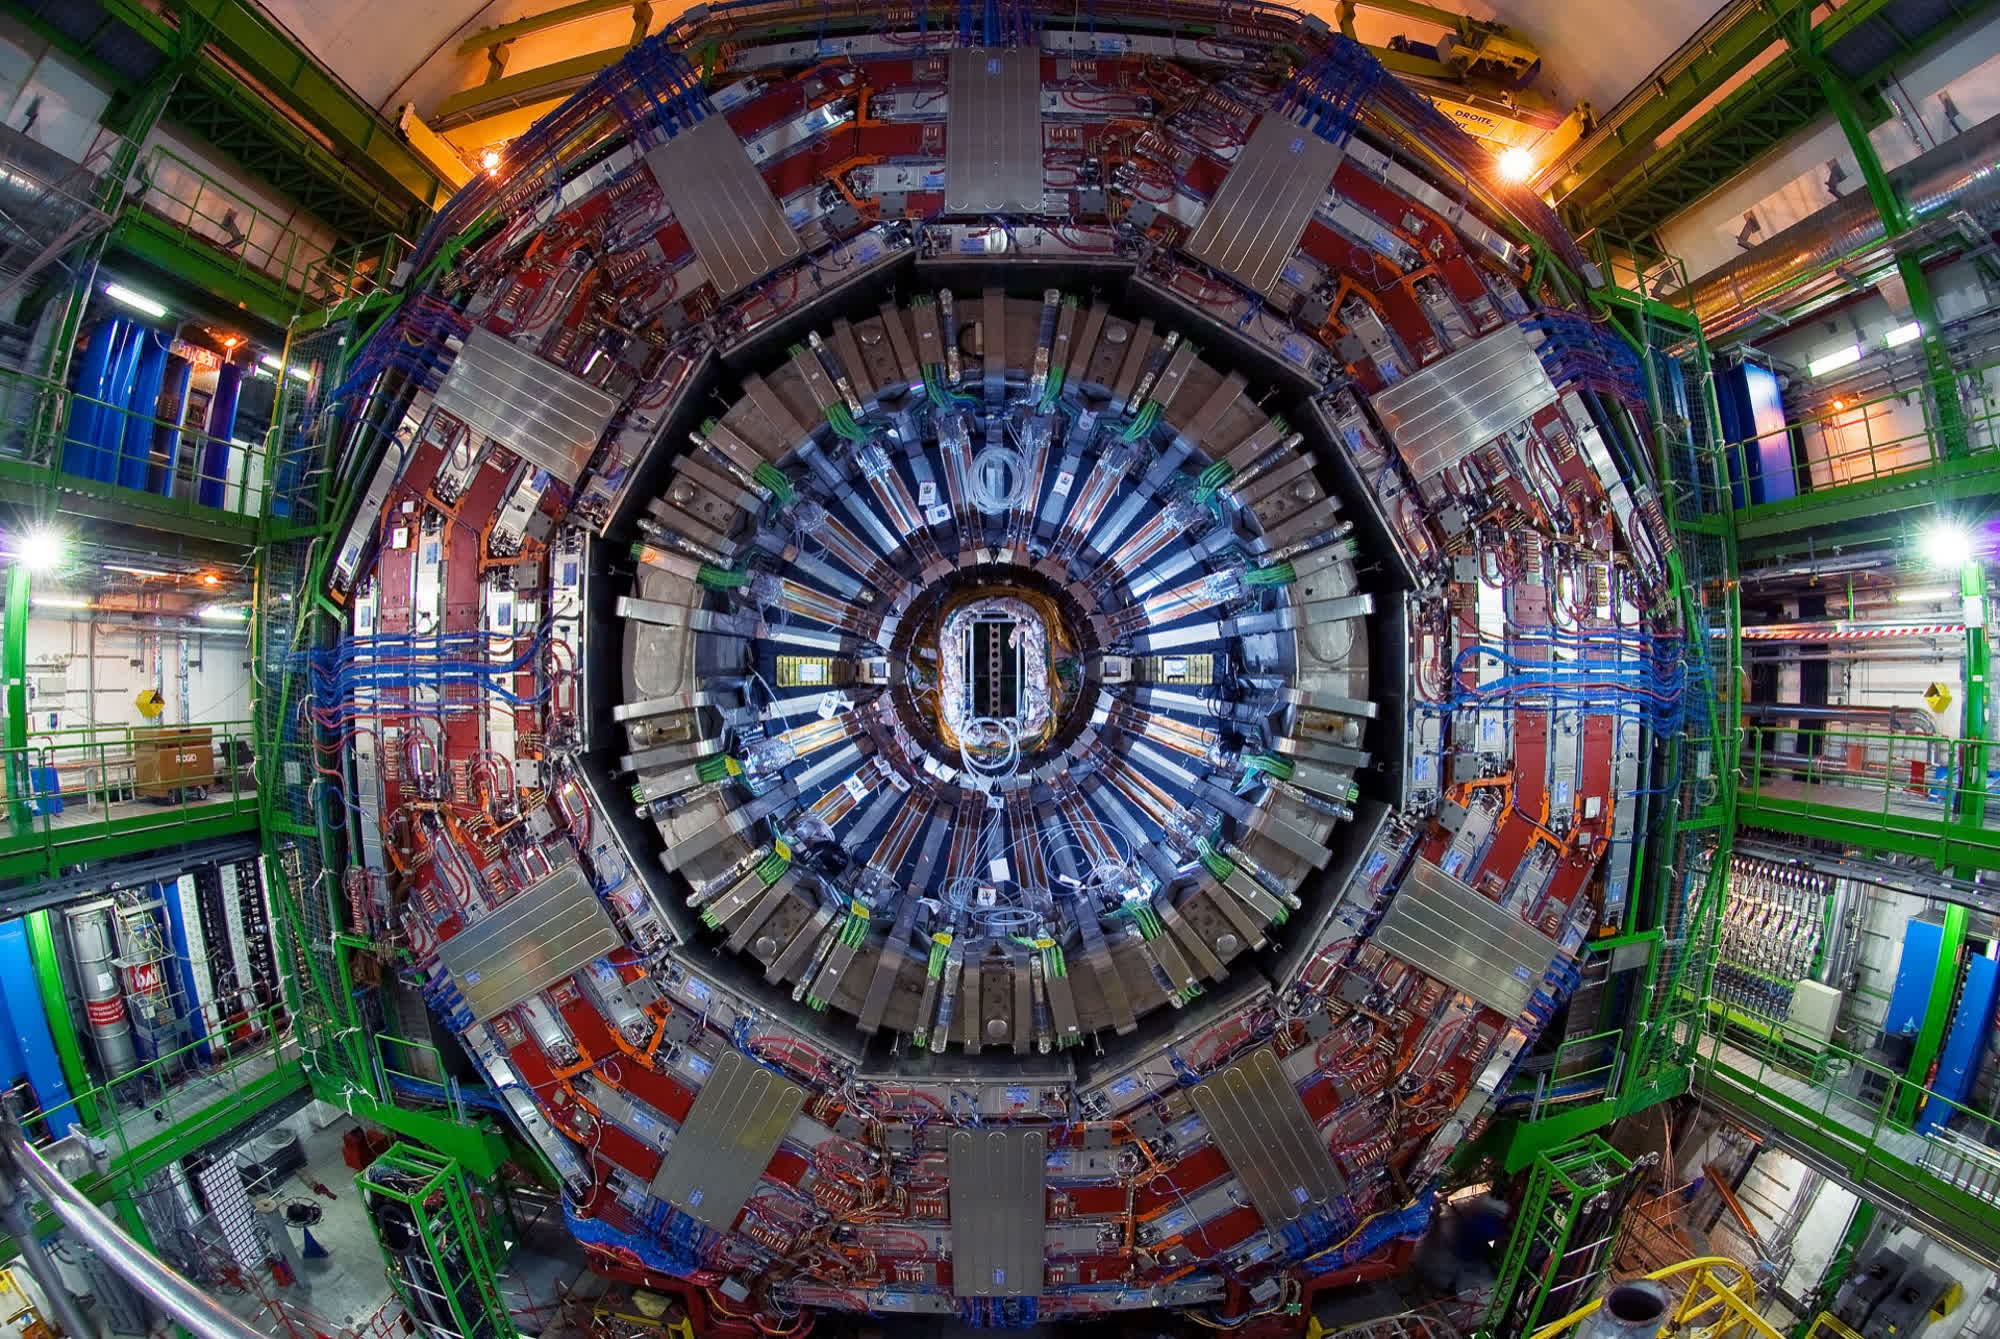 Large Hadron Collider experiments detect the first man-made neutrinos